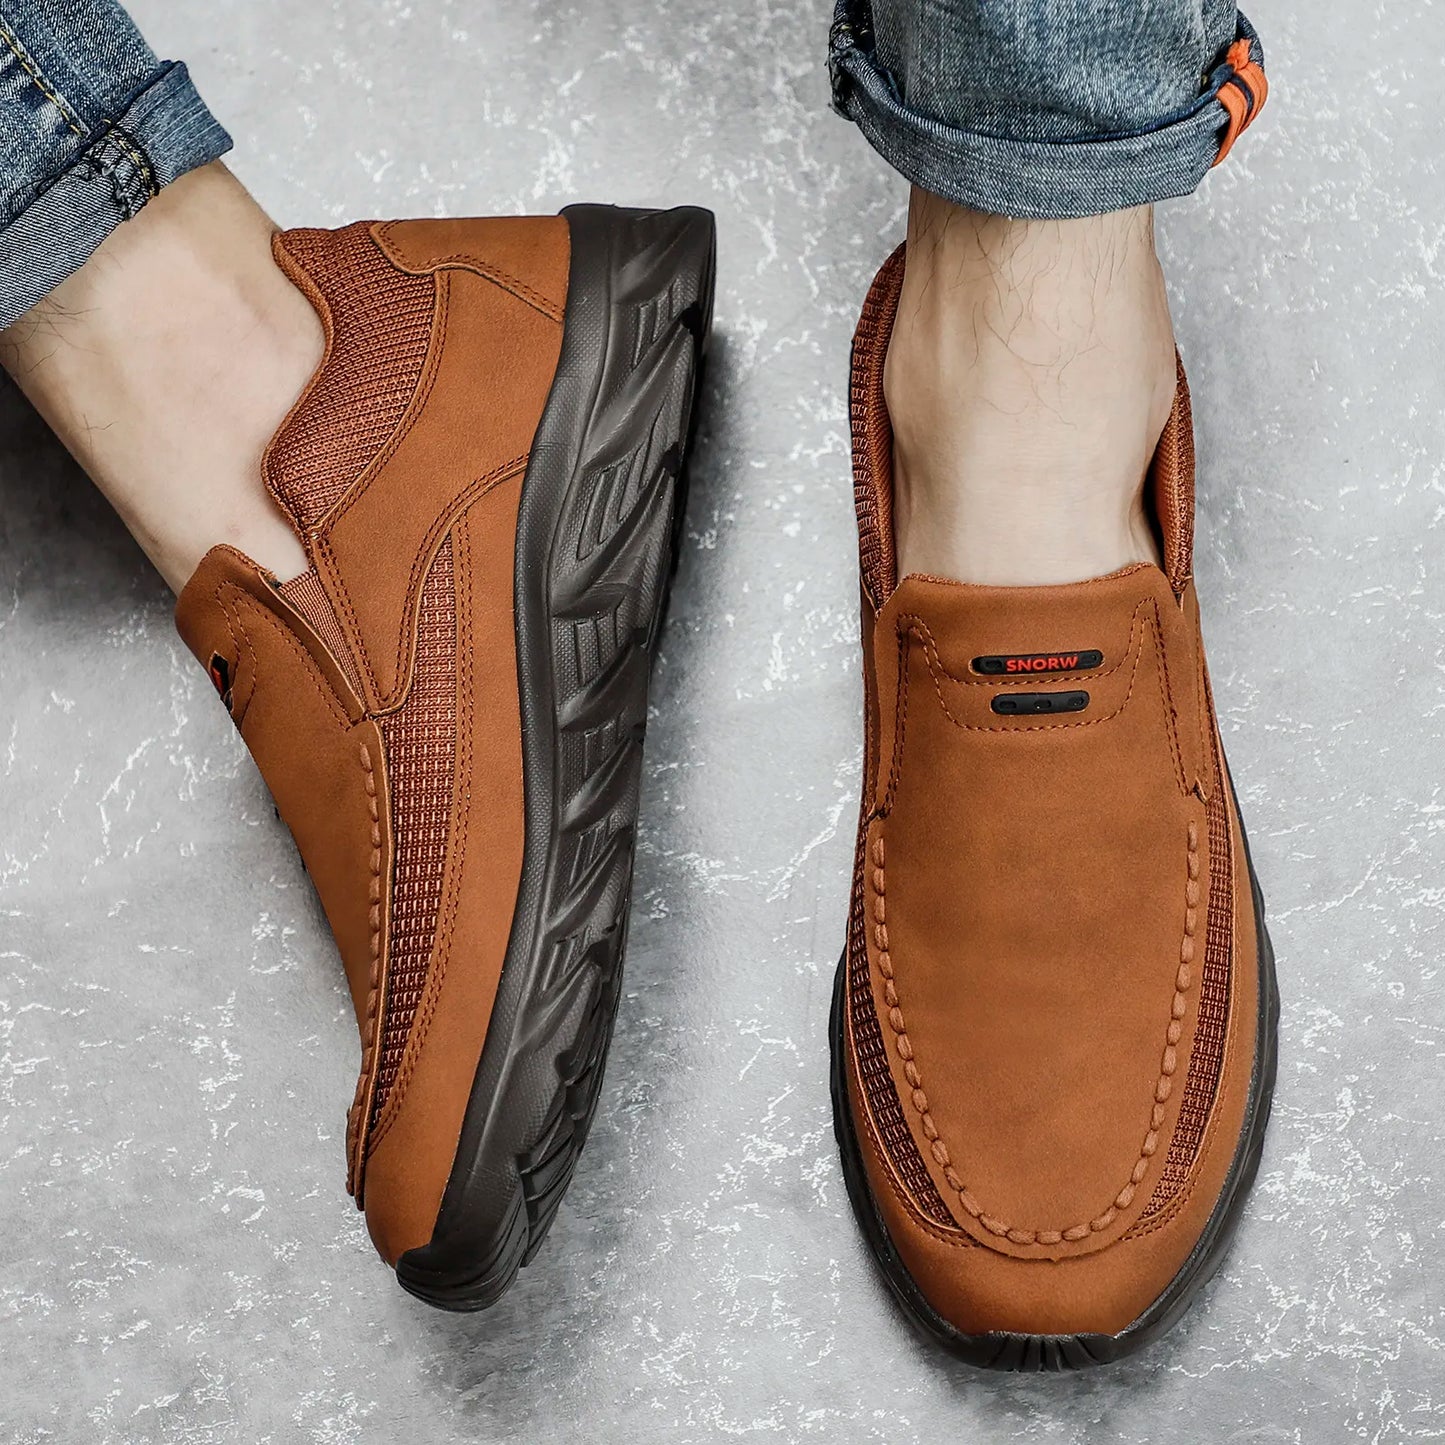 Spring Classic Leather Moccasins Loafers